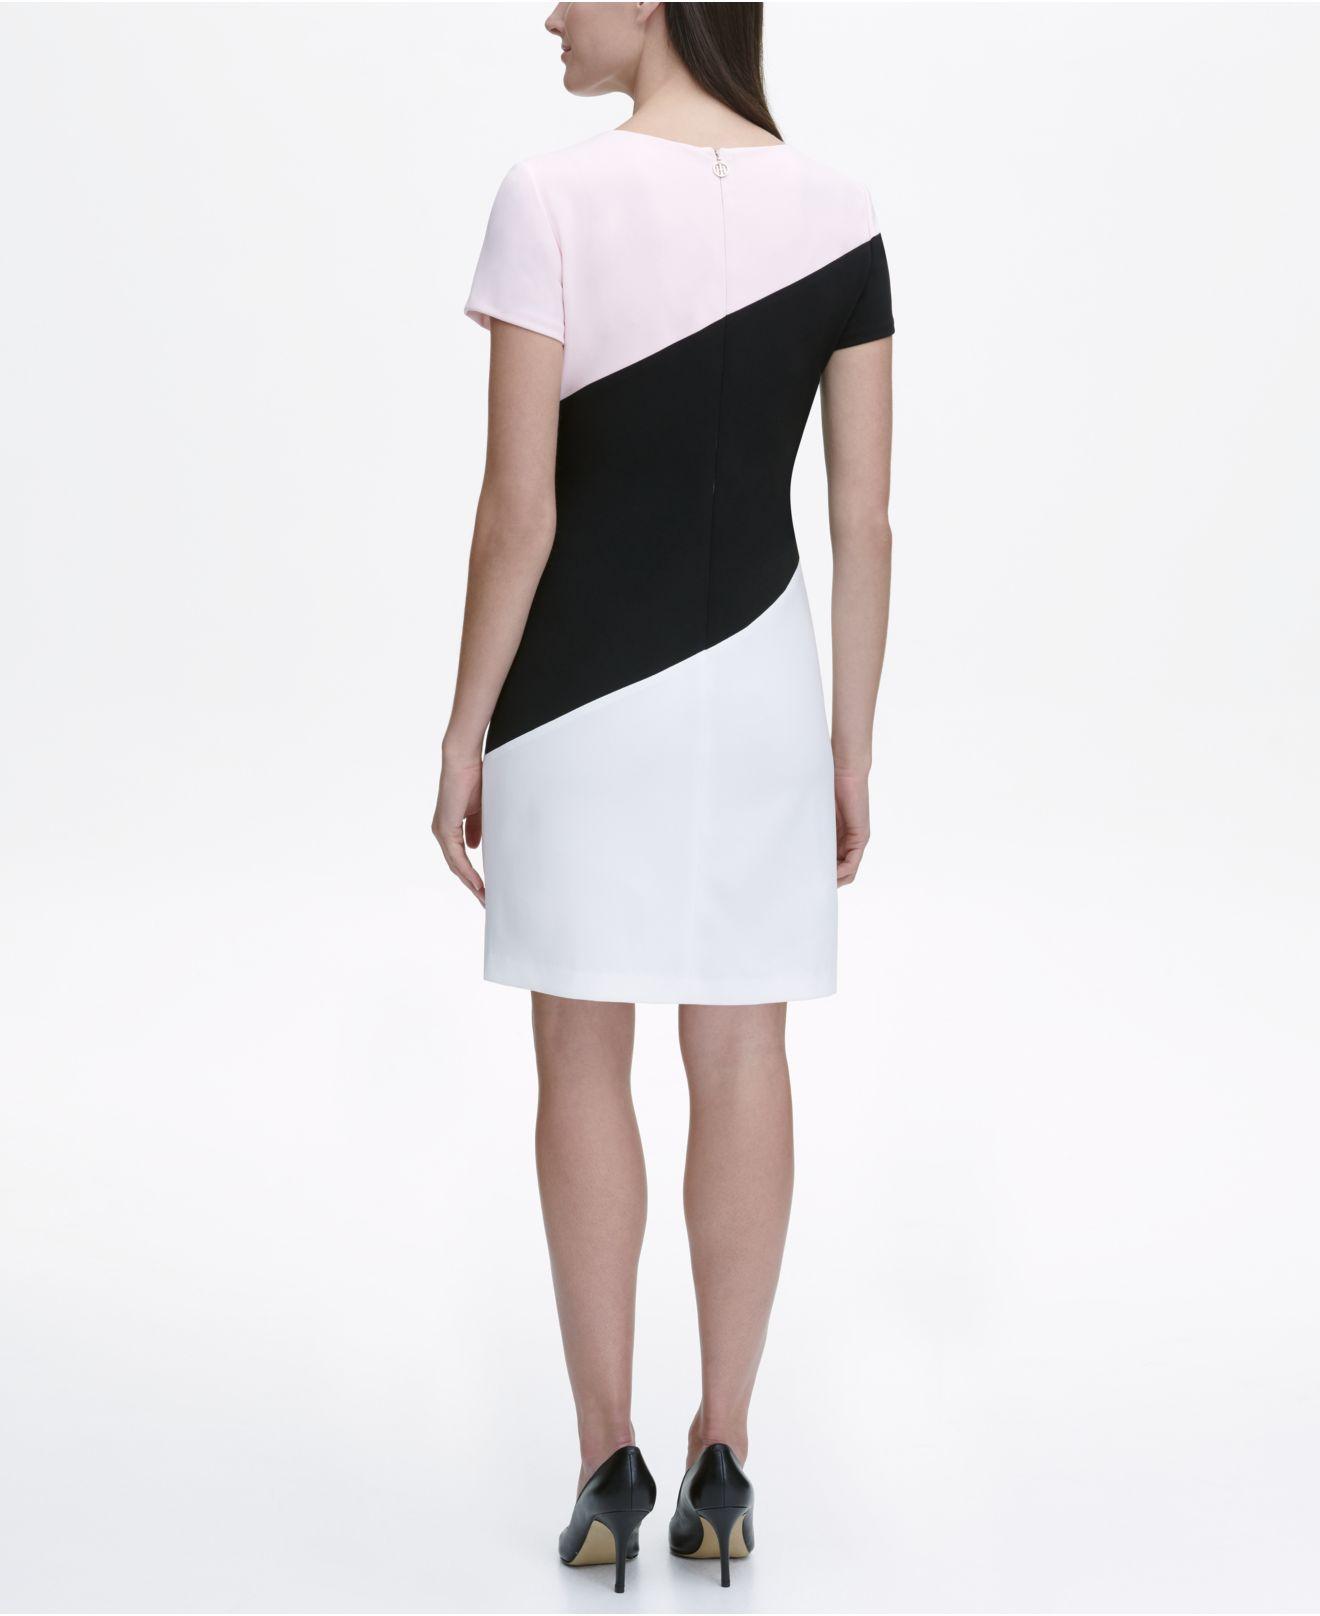 tommy hilfiger black dress with white collar